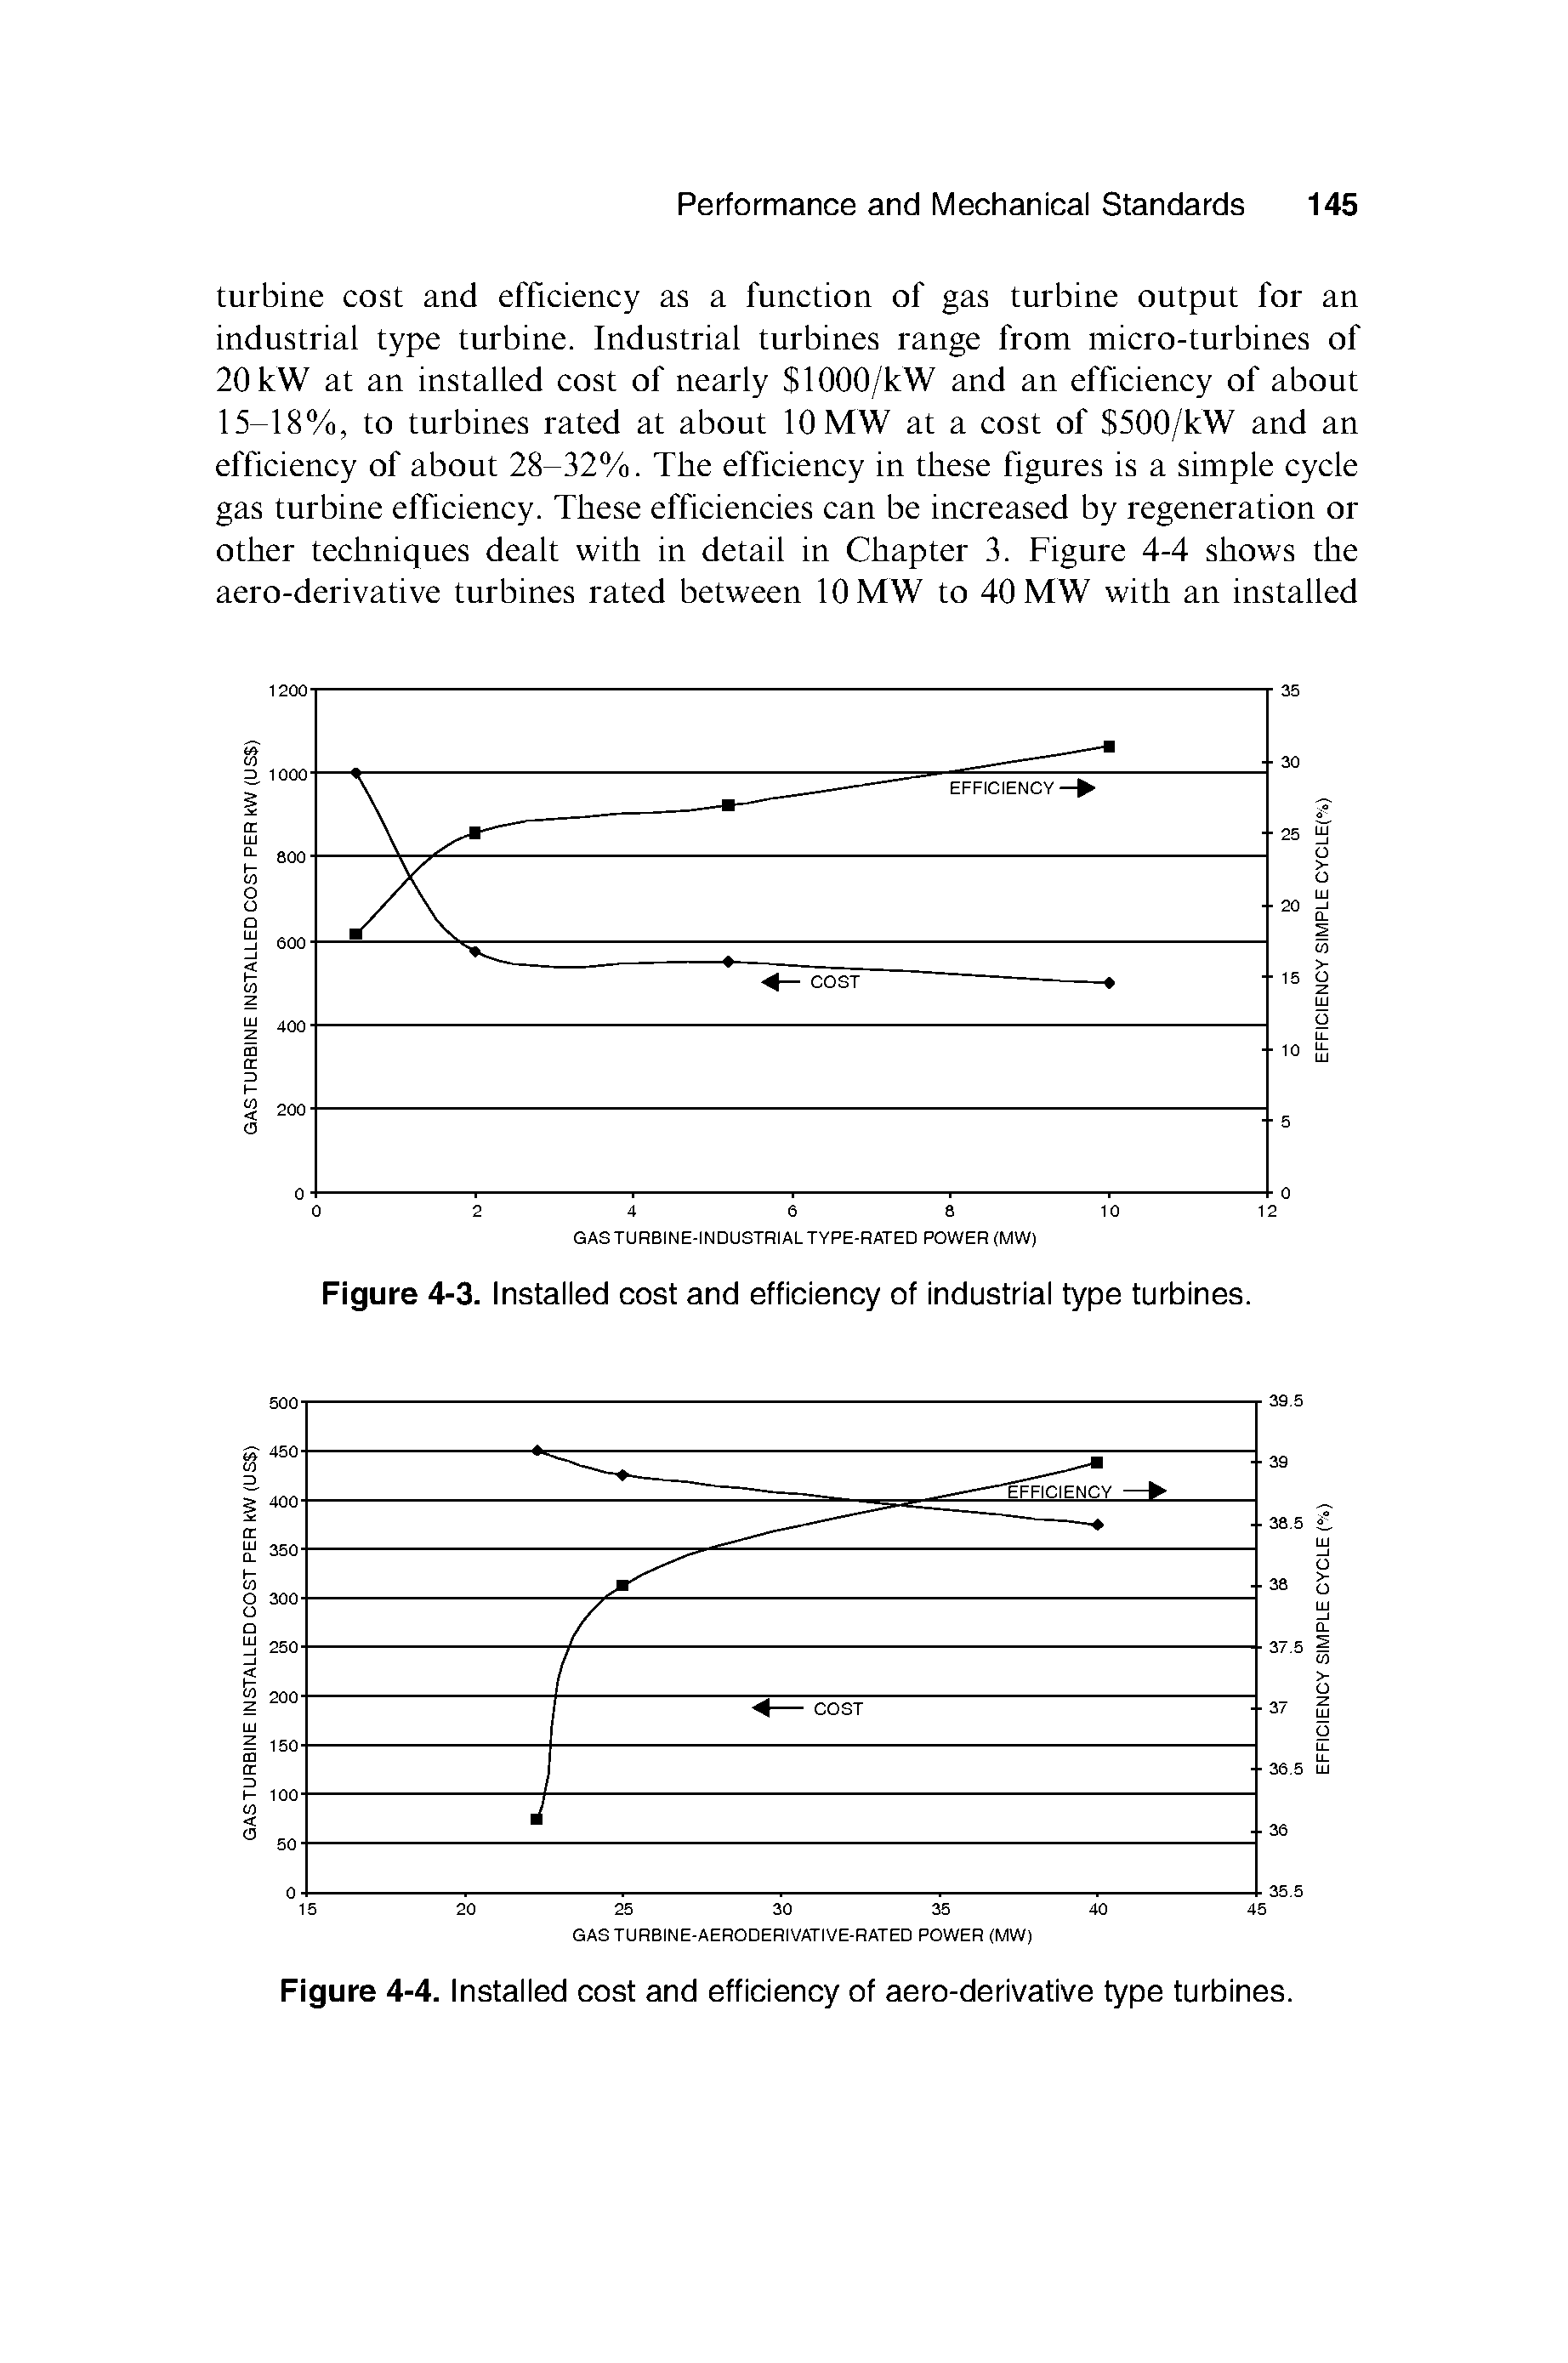 Figure 4-3. Installed cost and efficiency of Industrial type turbines.